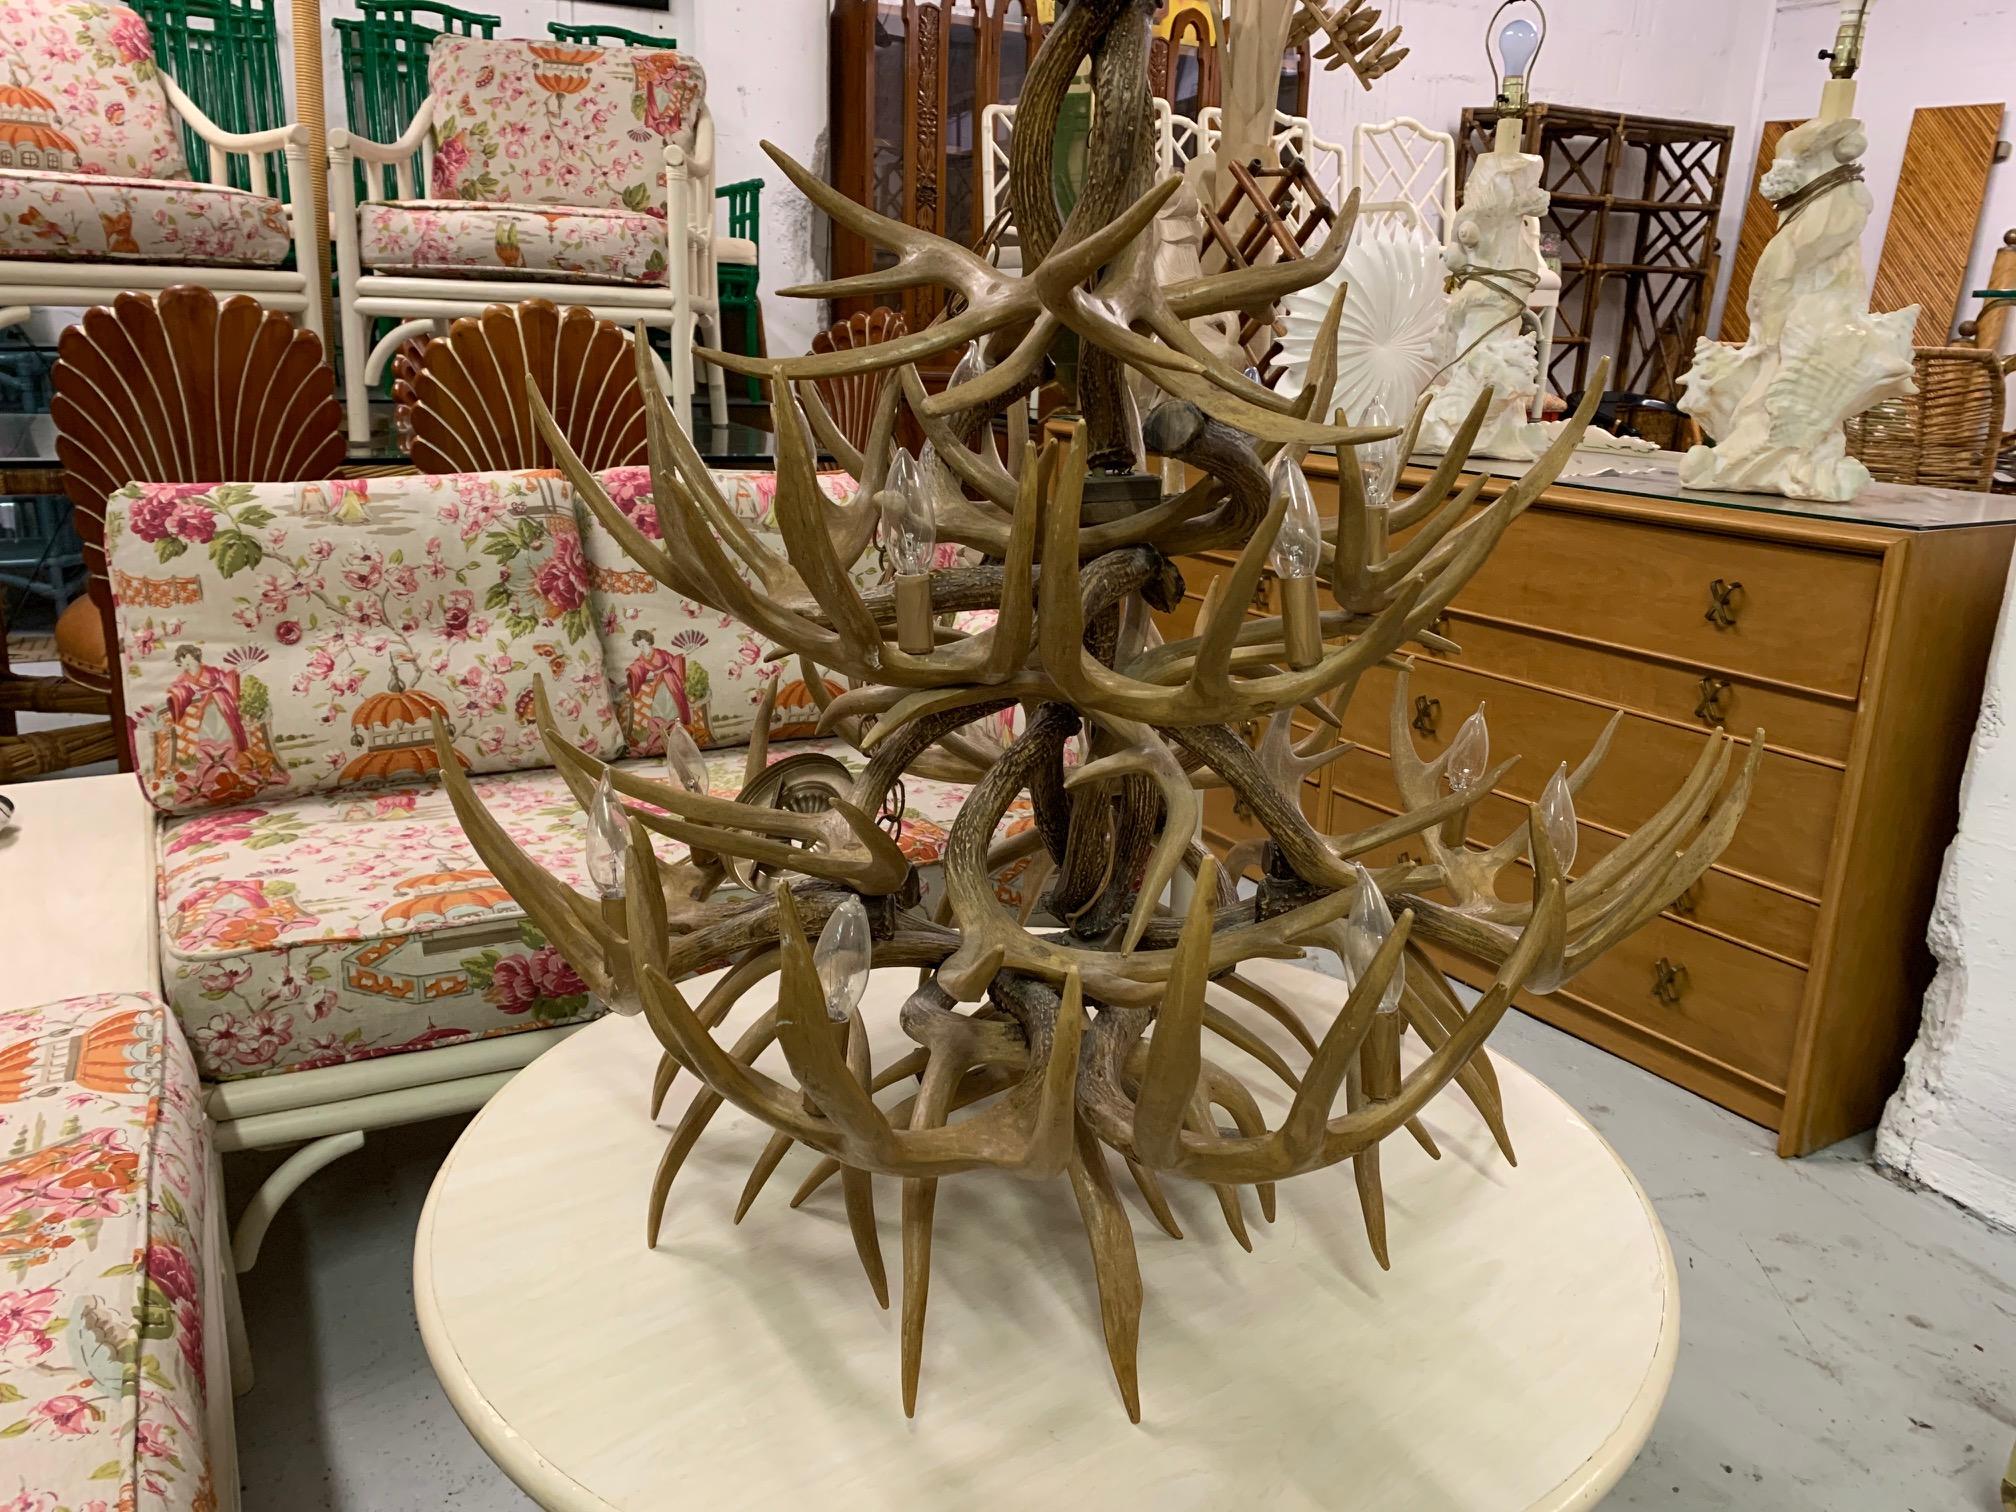 Large antler chandelier features 14-light and dozens of stag antlers. Handmade in the mid-20th century. Very good vintage condition with no flaws to speak of, and a warm natural patina.